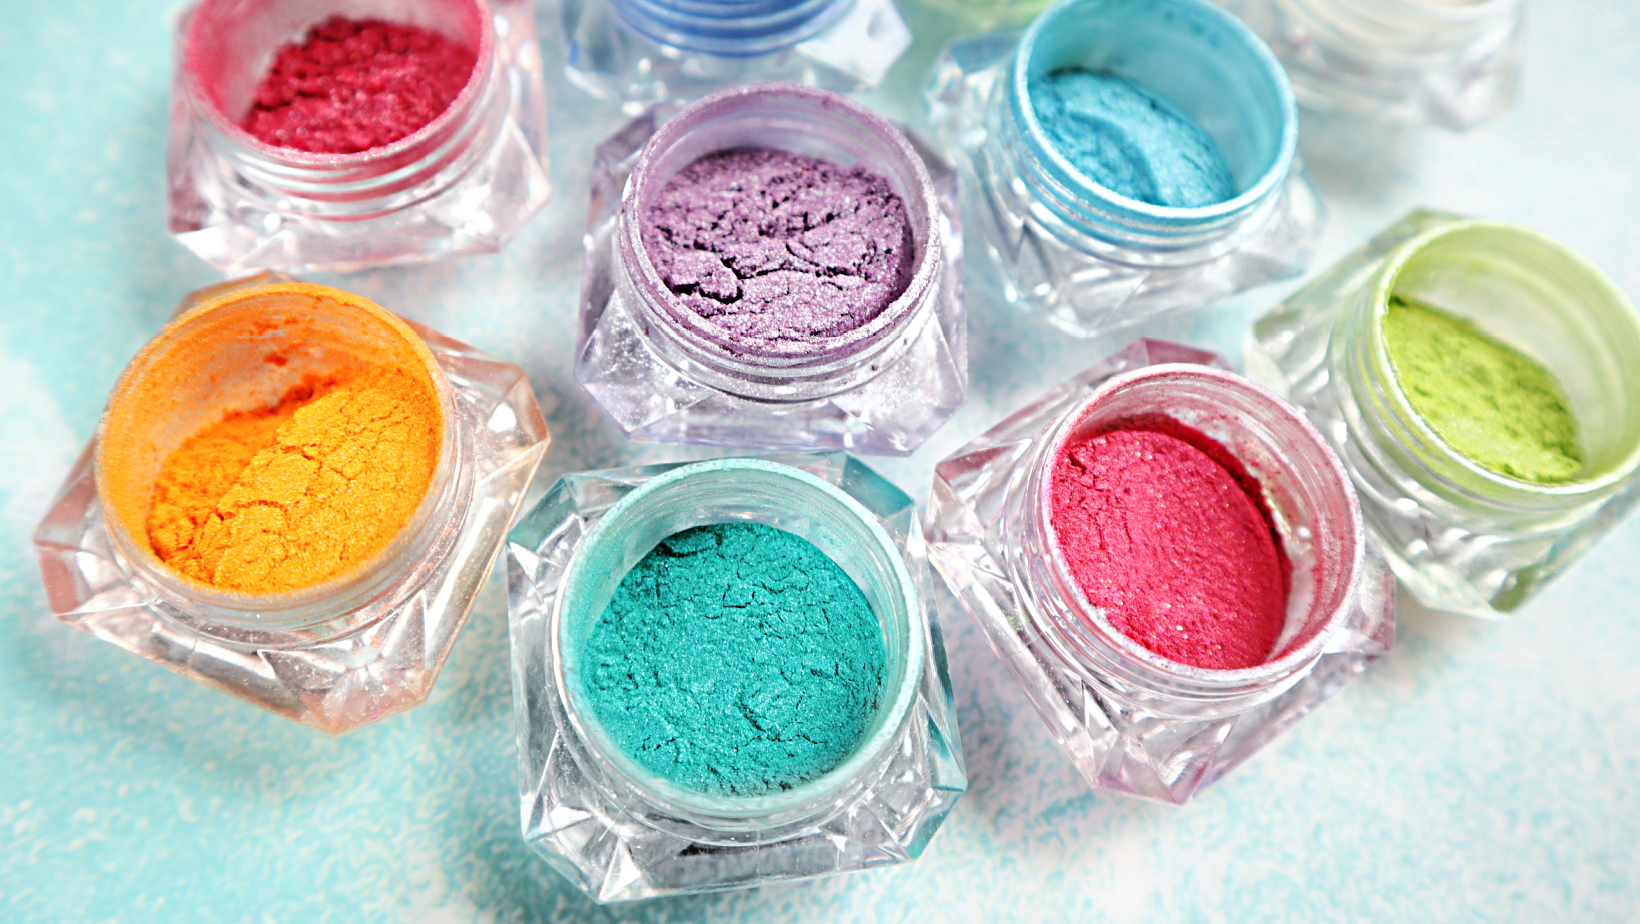 All About Micas and Pigments